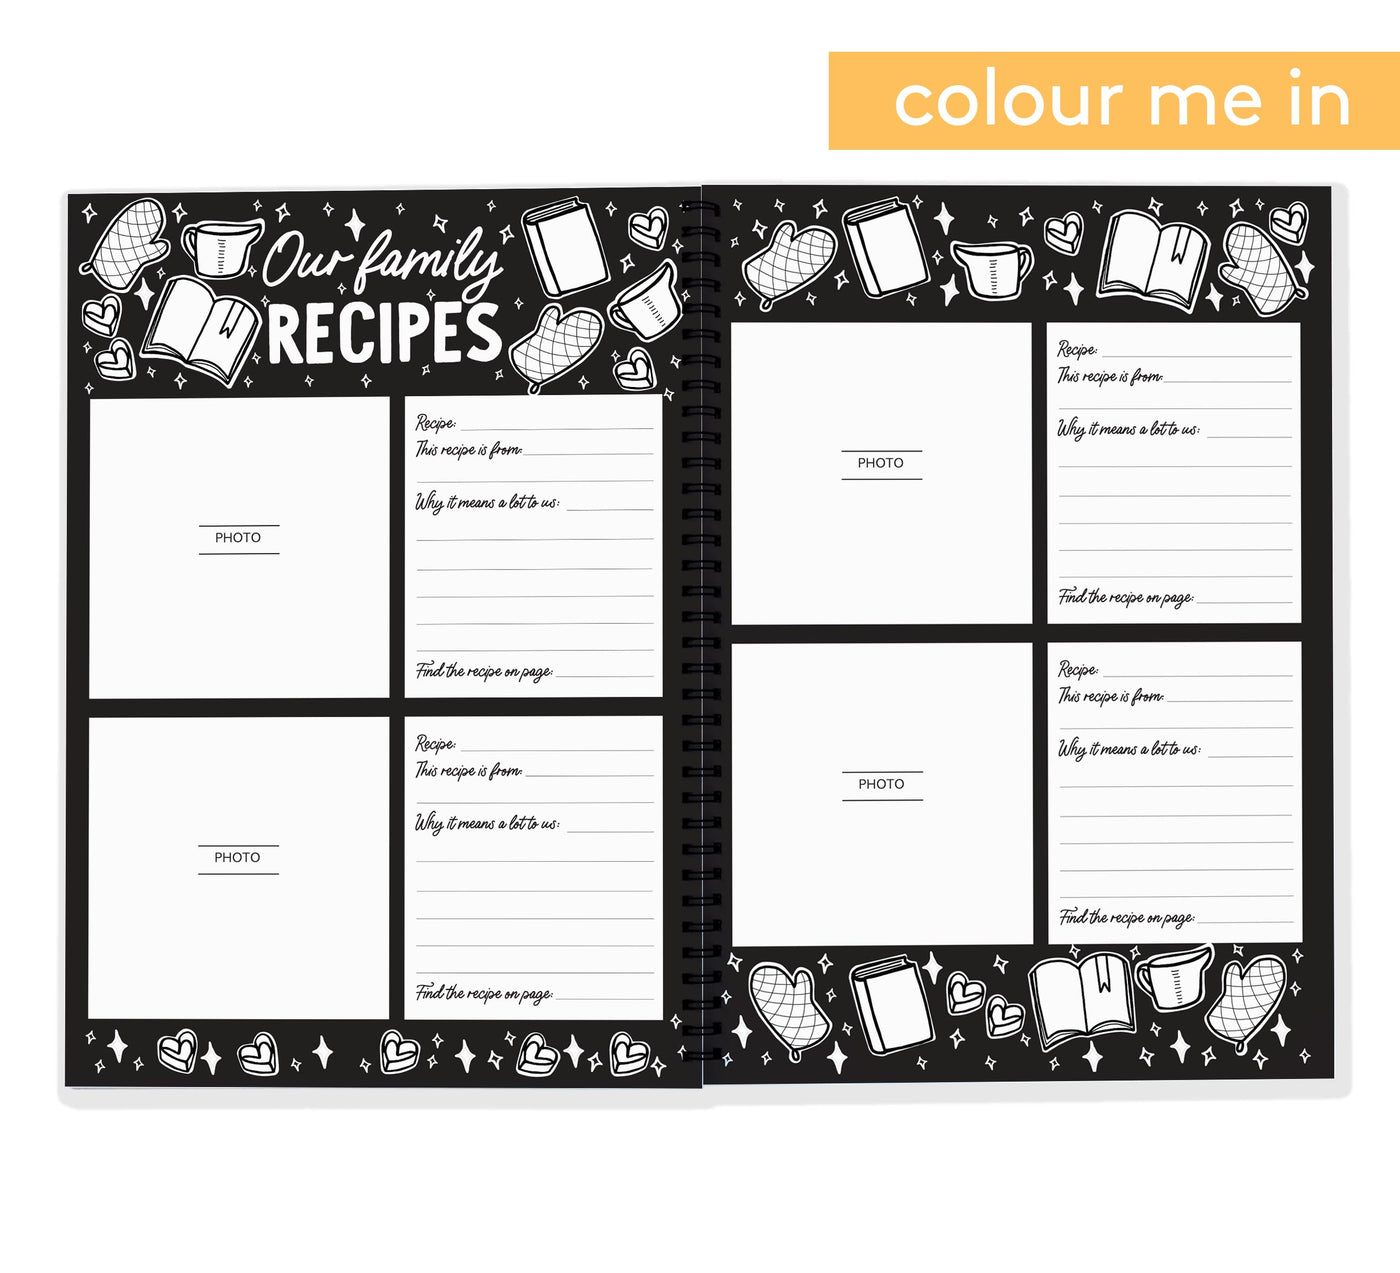 The fun Family Recipe Book that turns every culinary family treasure into a kitchen adventure for young and old. Monochrome | Colour in | For 42 recipes! www.blueberryco.com.au